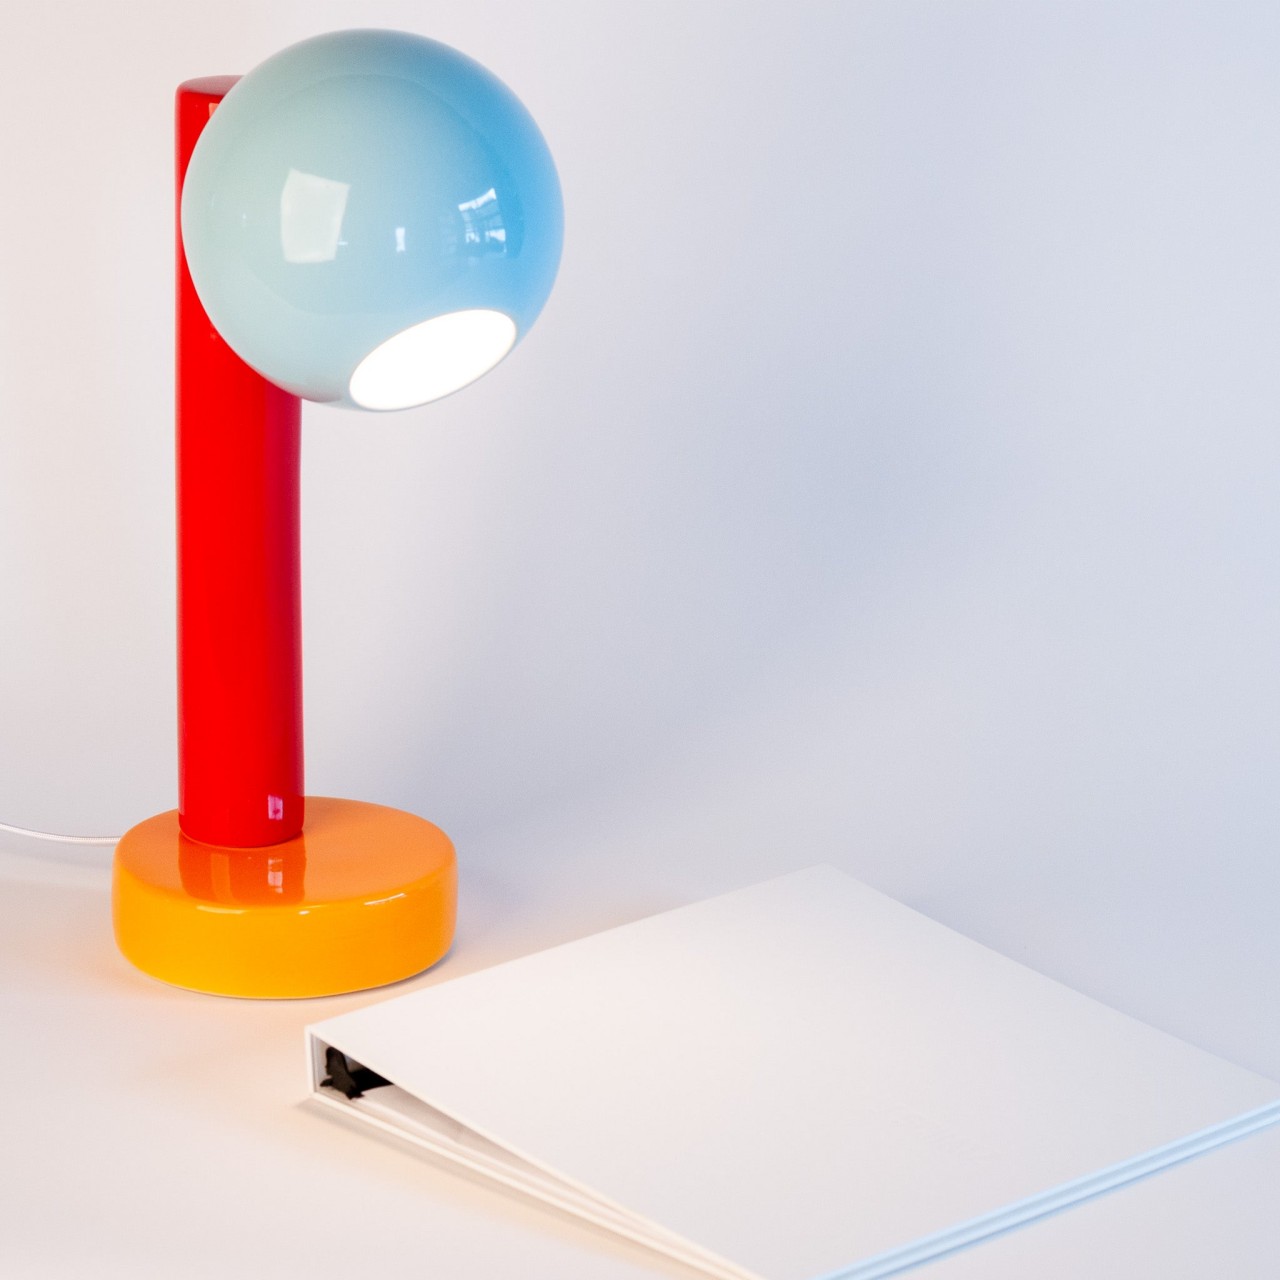 https://www.yankodesign.com/images/design_news/2023/07/this-stoneware-lamp-exudes-an-artistic-yet-playful-character-that-livens-up-any-desk/spot-on-desk-lamp-5.jpg